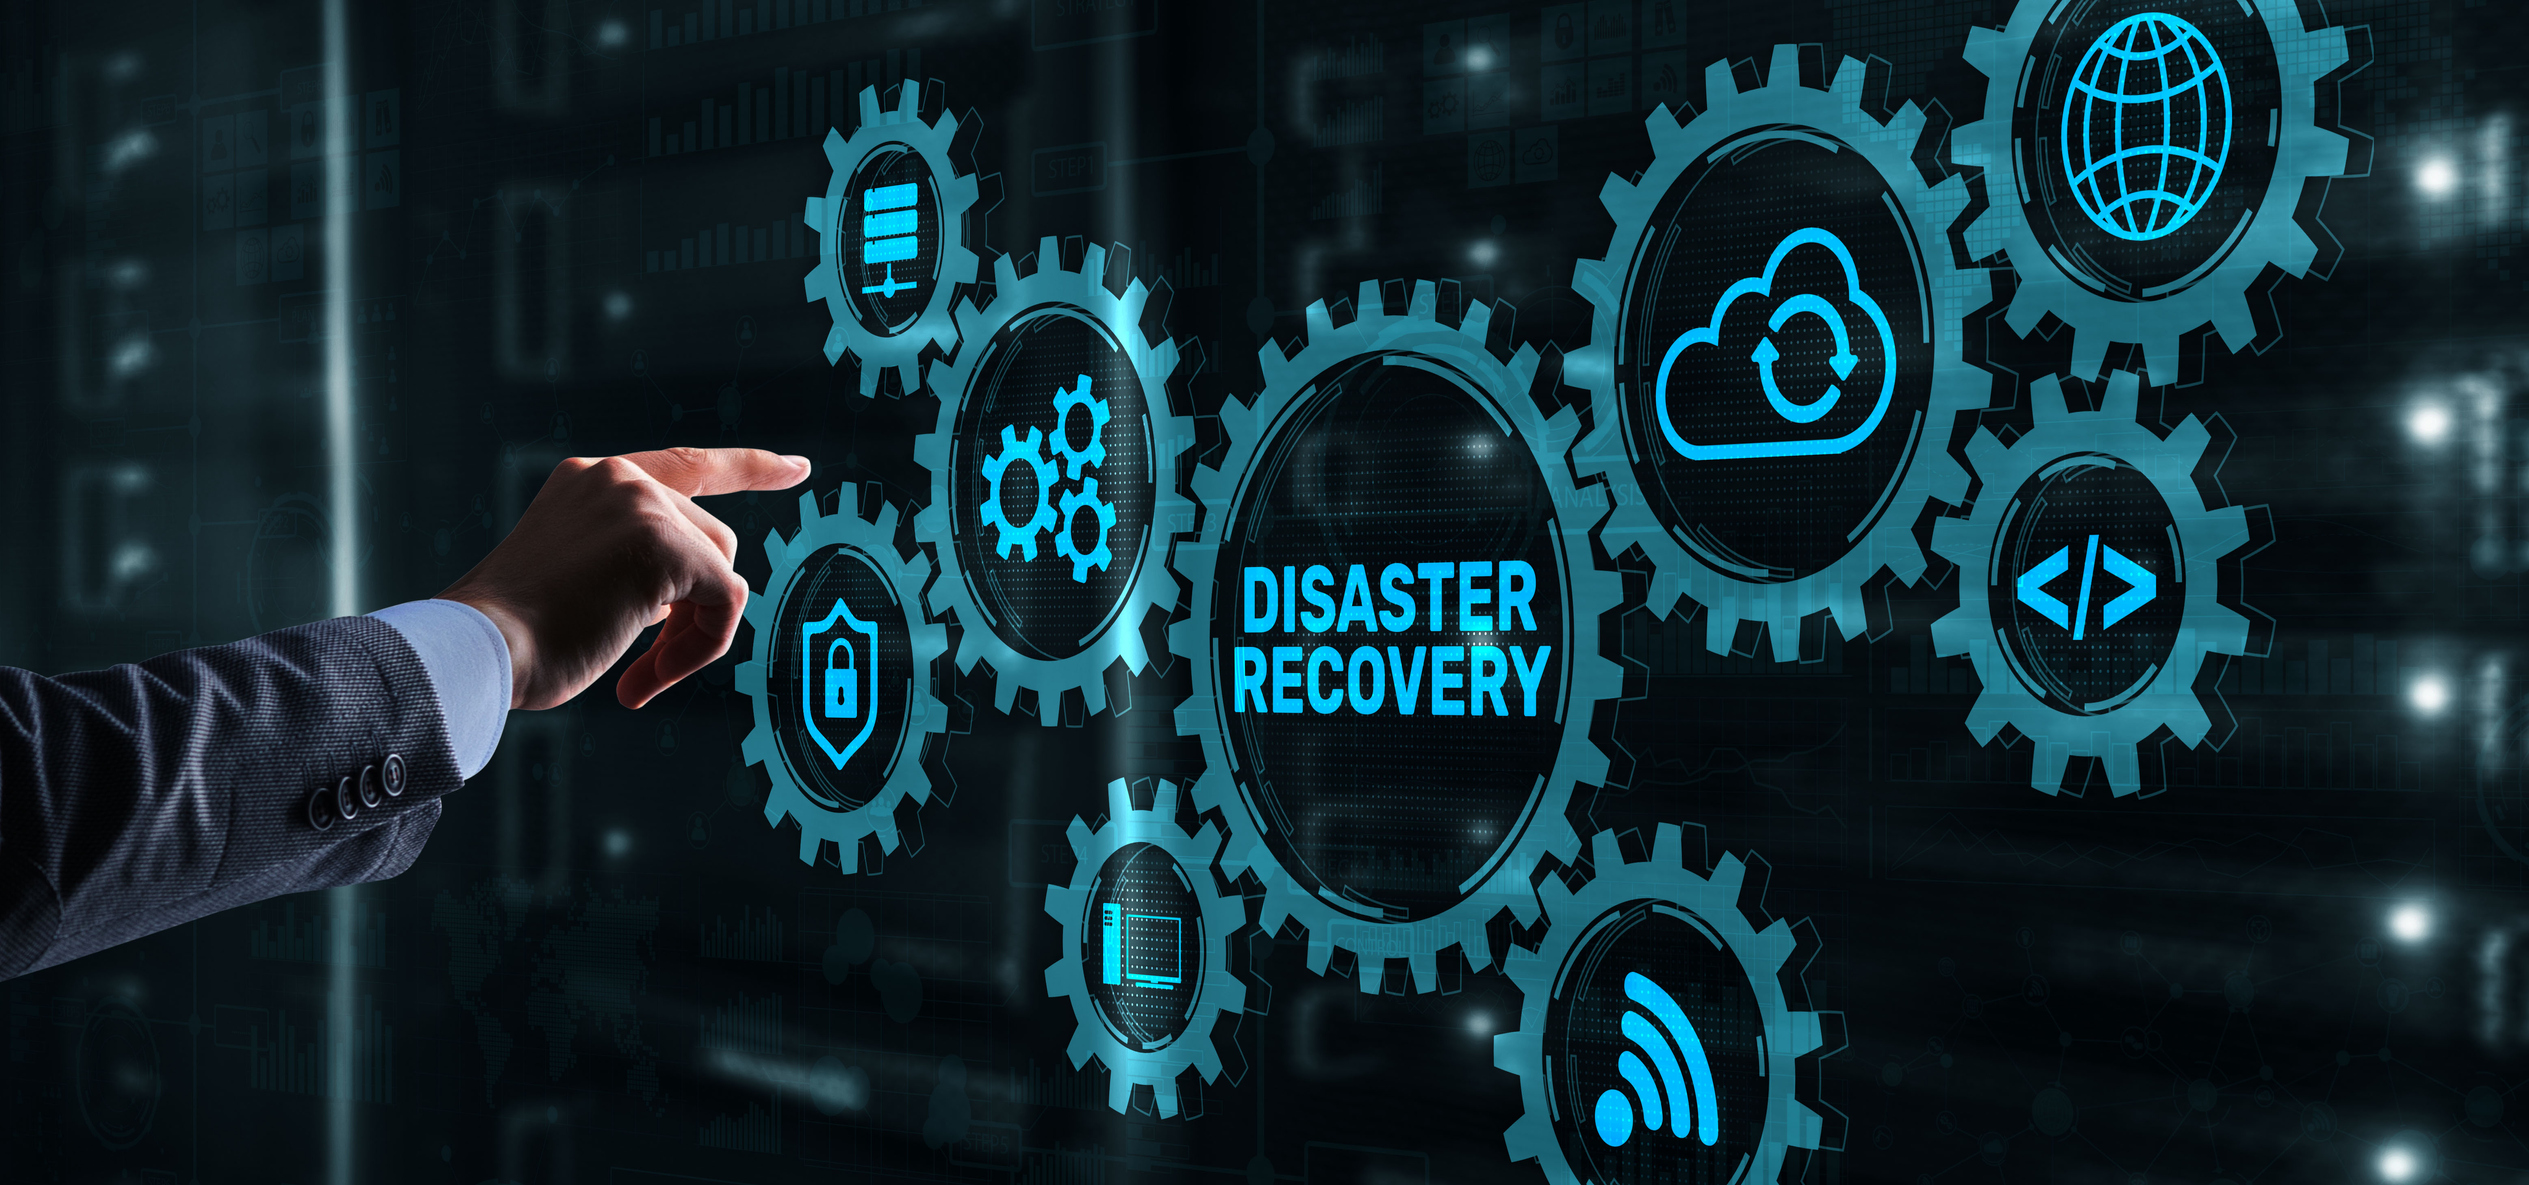 Why You Need to Make Disaster Recovery Your Top Priority